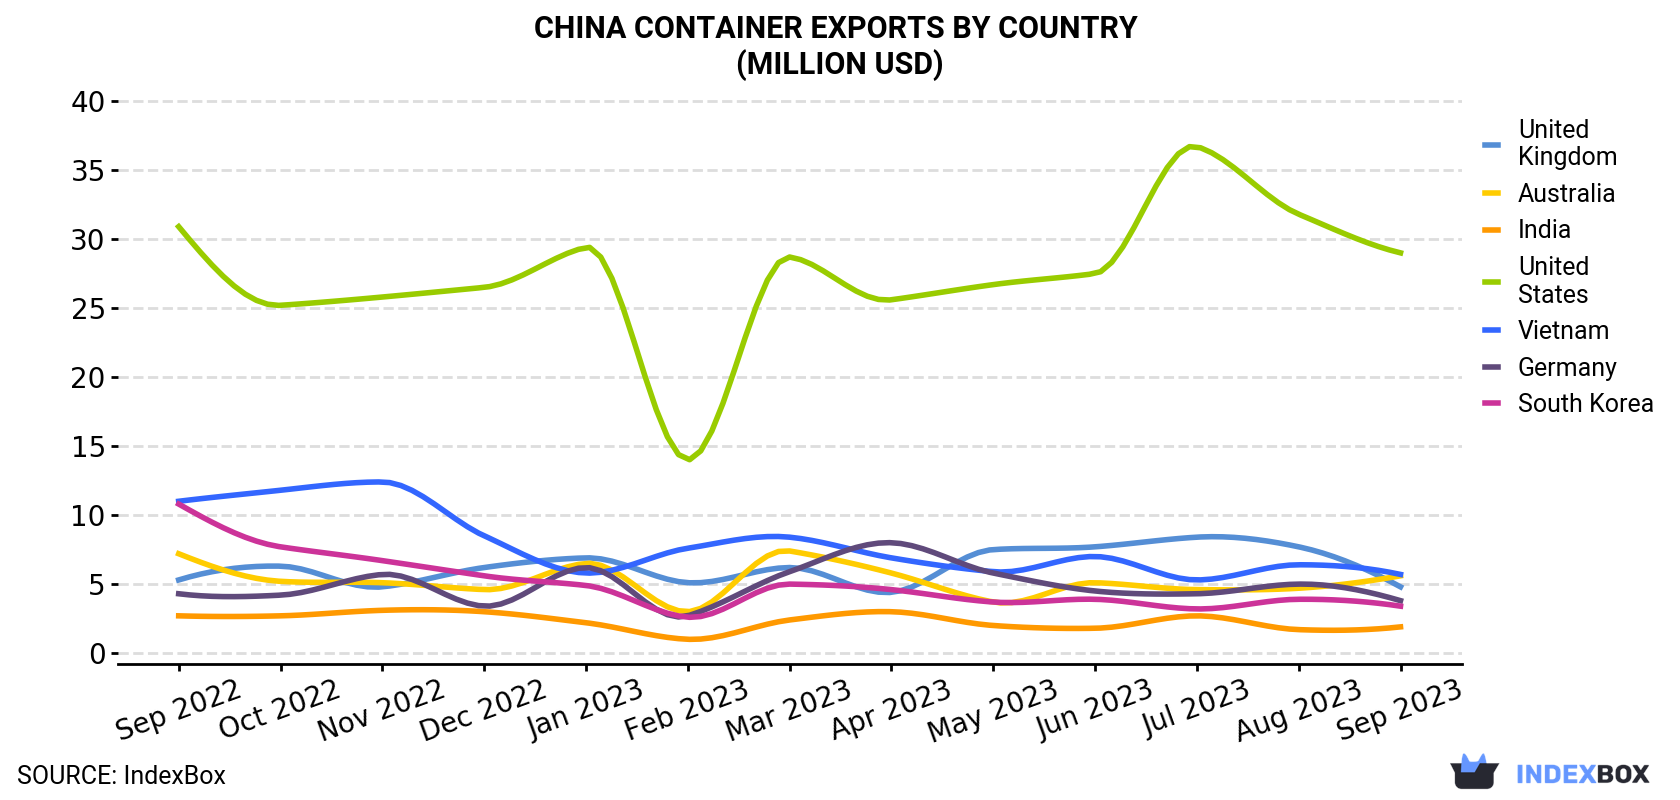 China Container Exports By Country (Million USD)